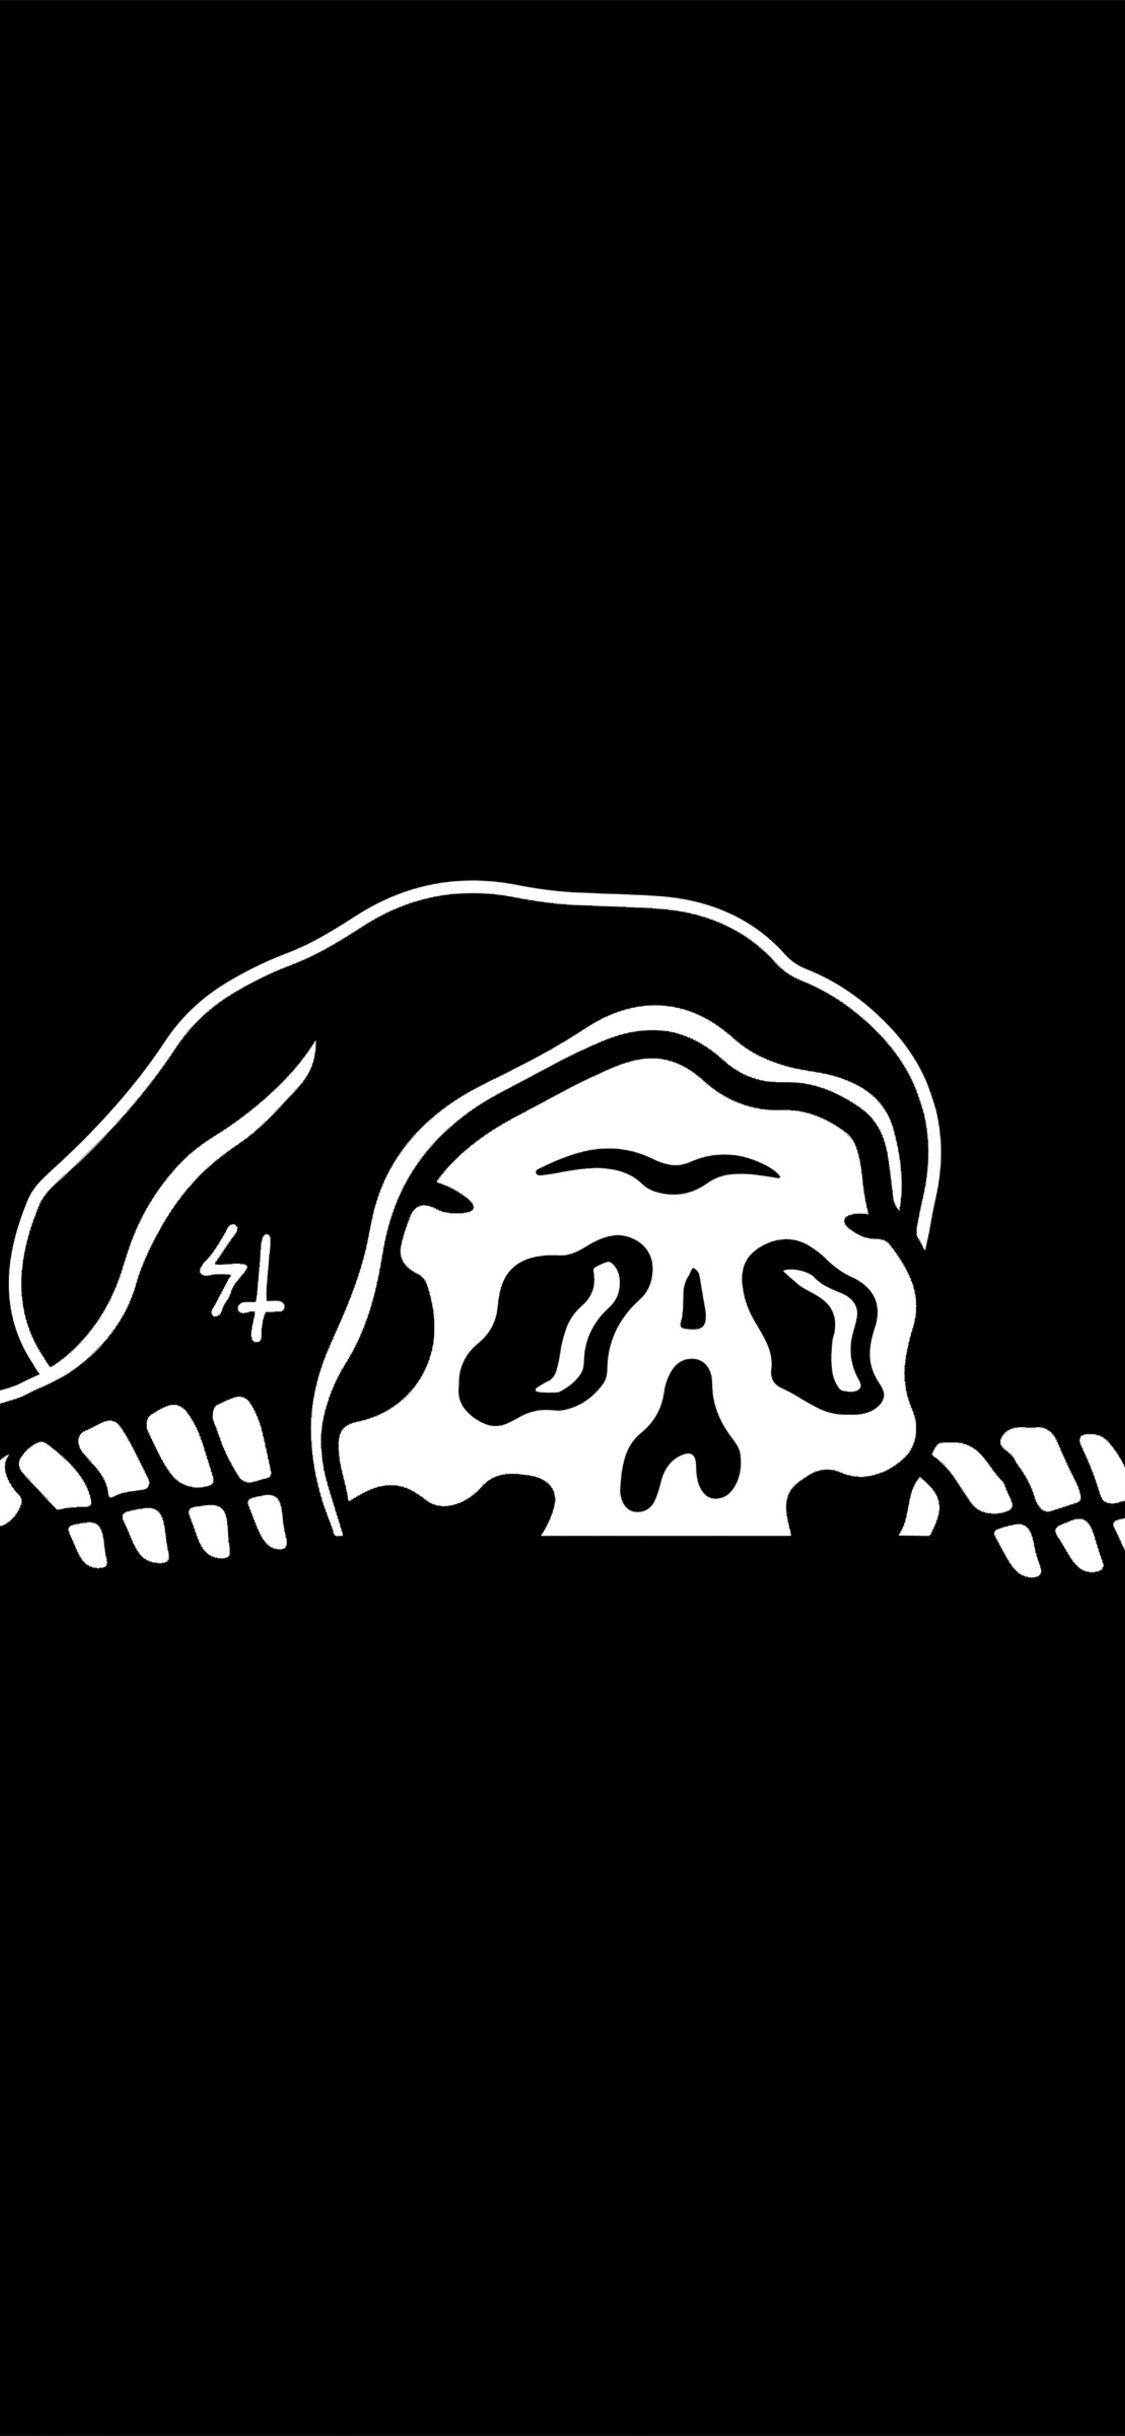 Skull Dark Black Minimal 4k iPhone XS, iPhone iPhone X HD 4k Wallpaper, Image, Background, Photo and Picture